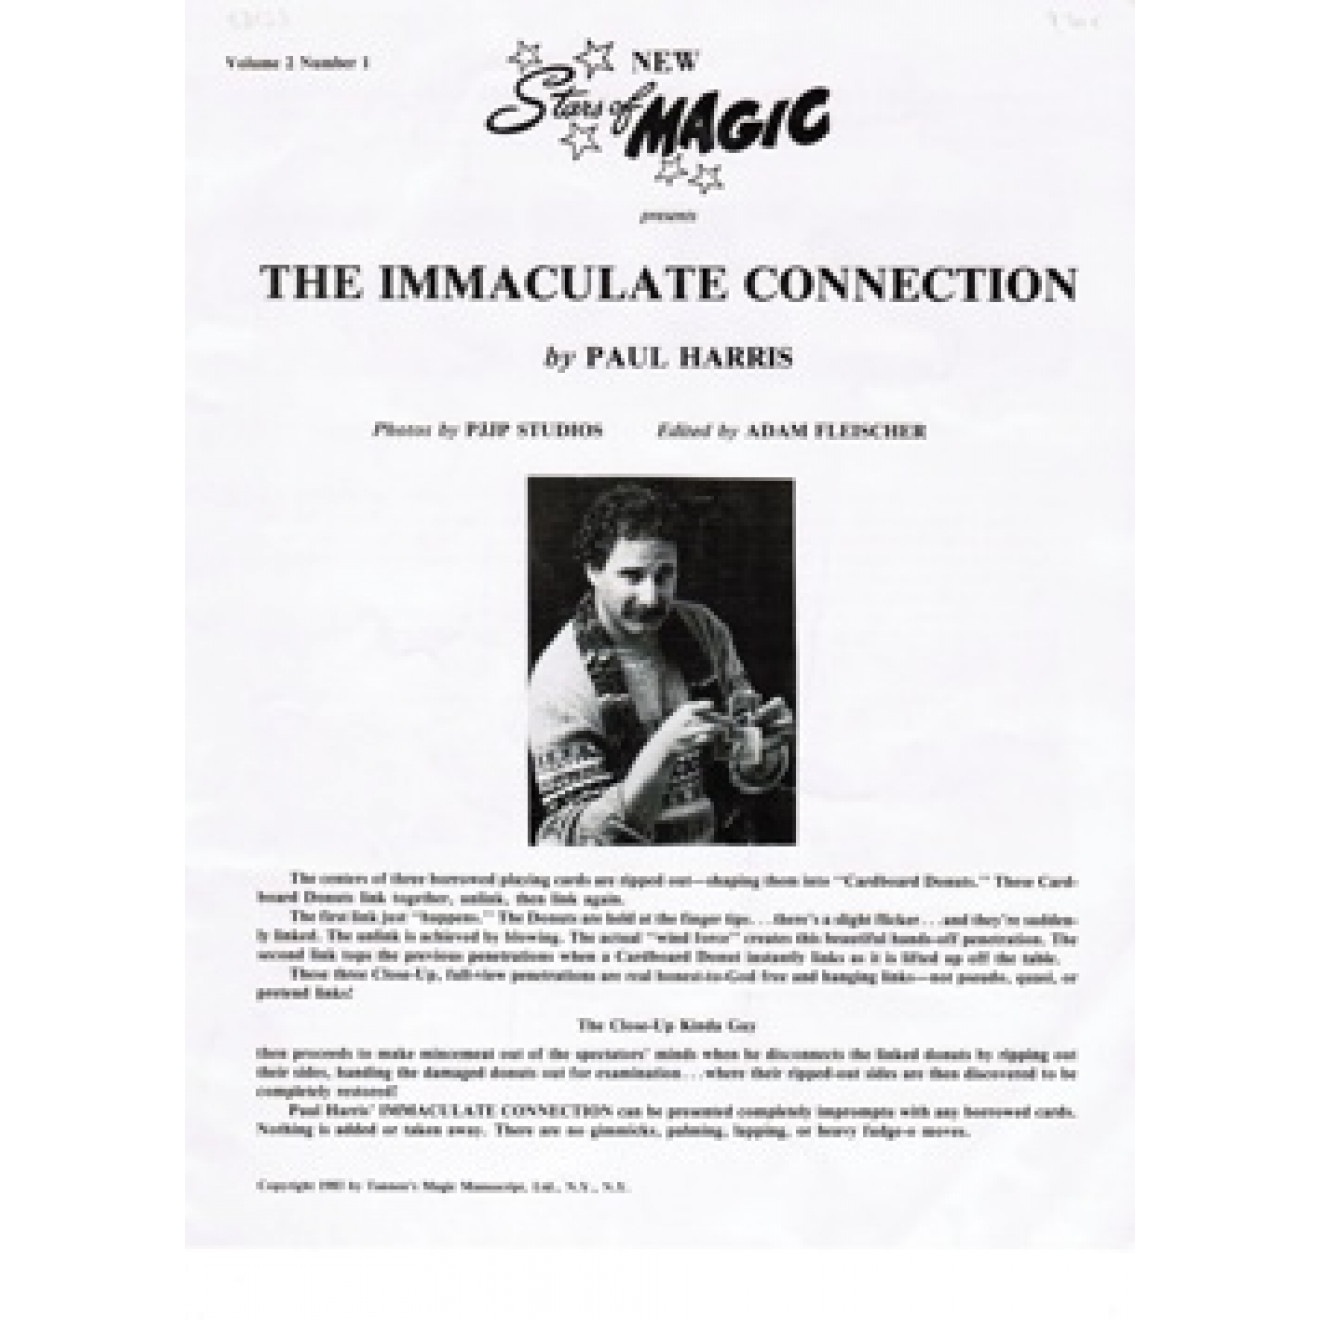 New Stars of Magic Vol.2, Nr.1: The Immaculate Connection